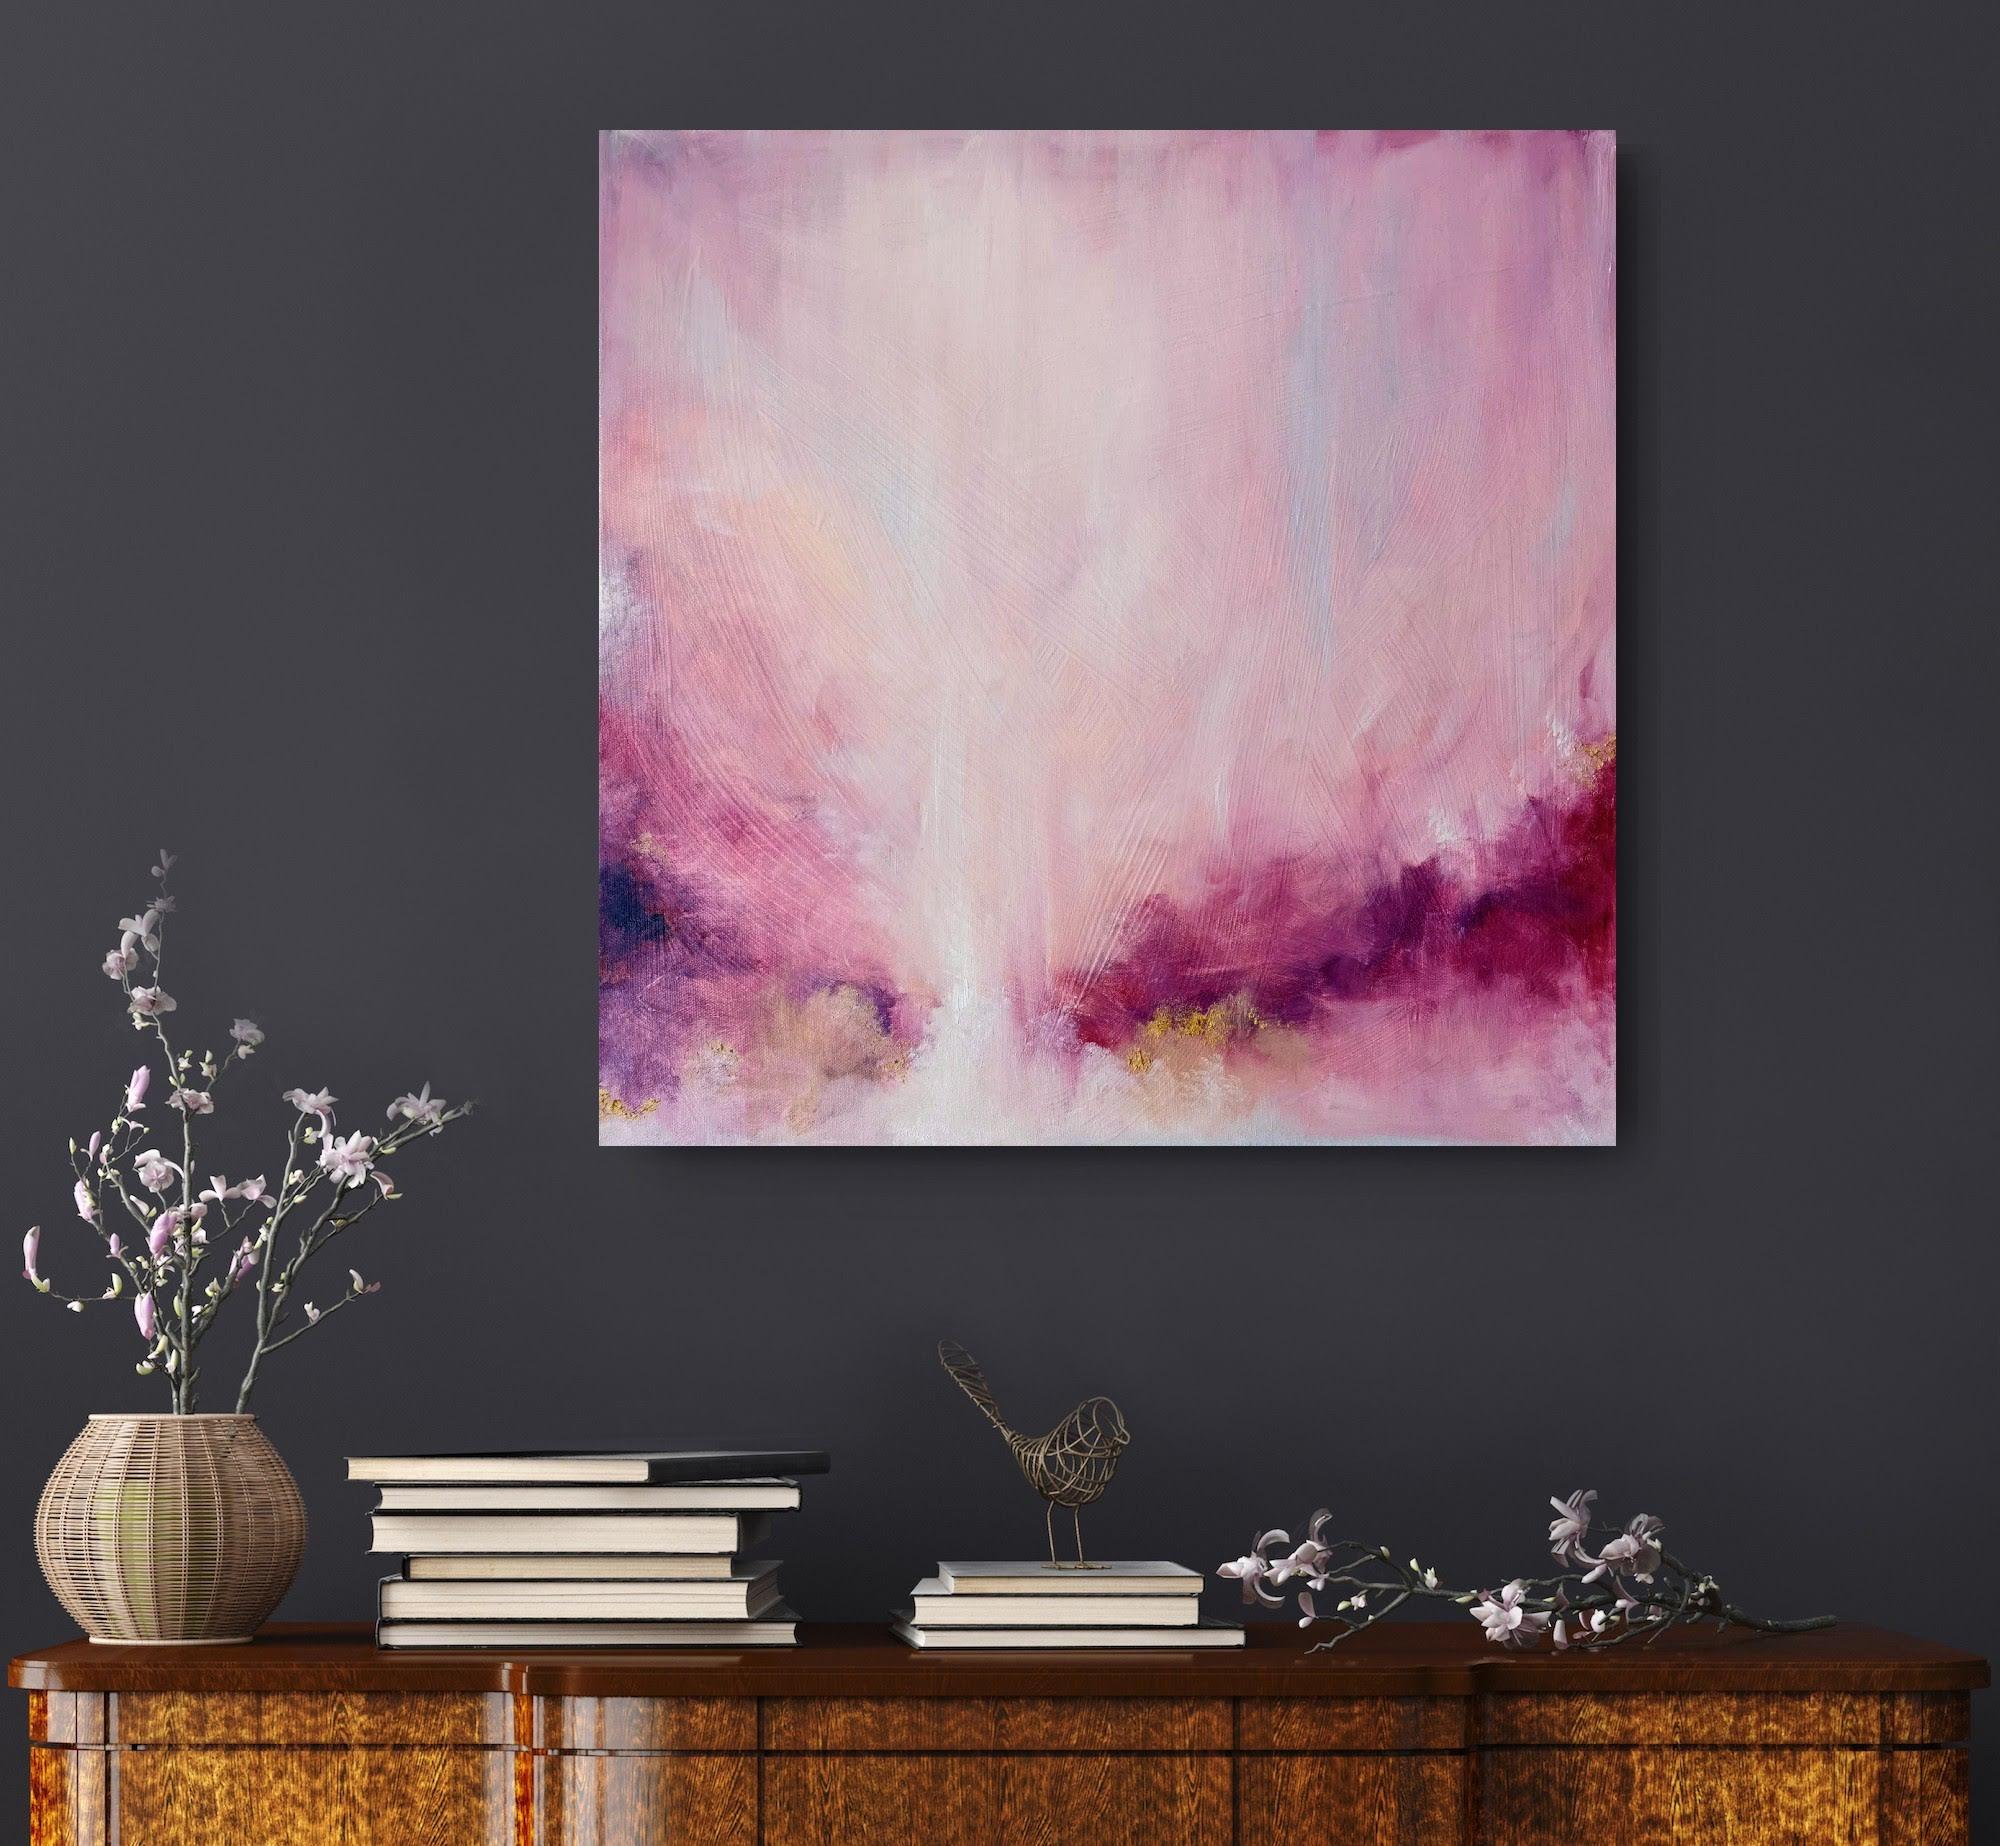 This is why I love you - Pink and gold abstract painting 4